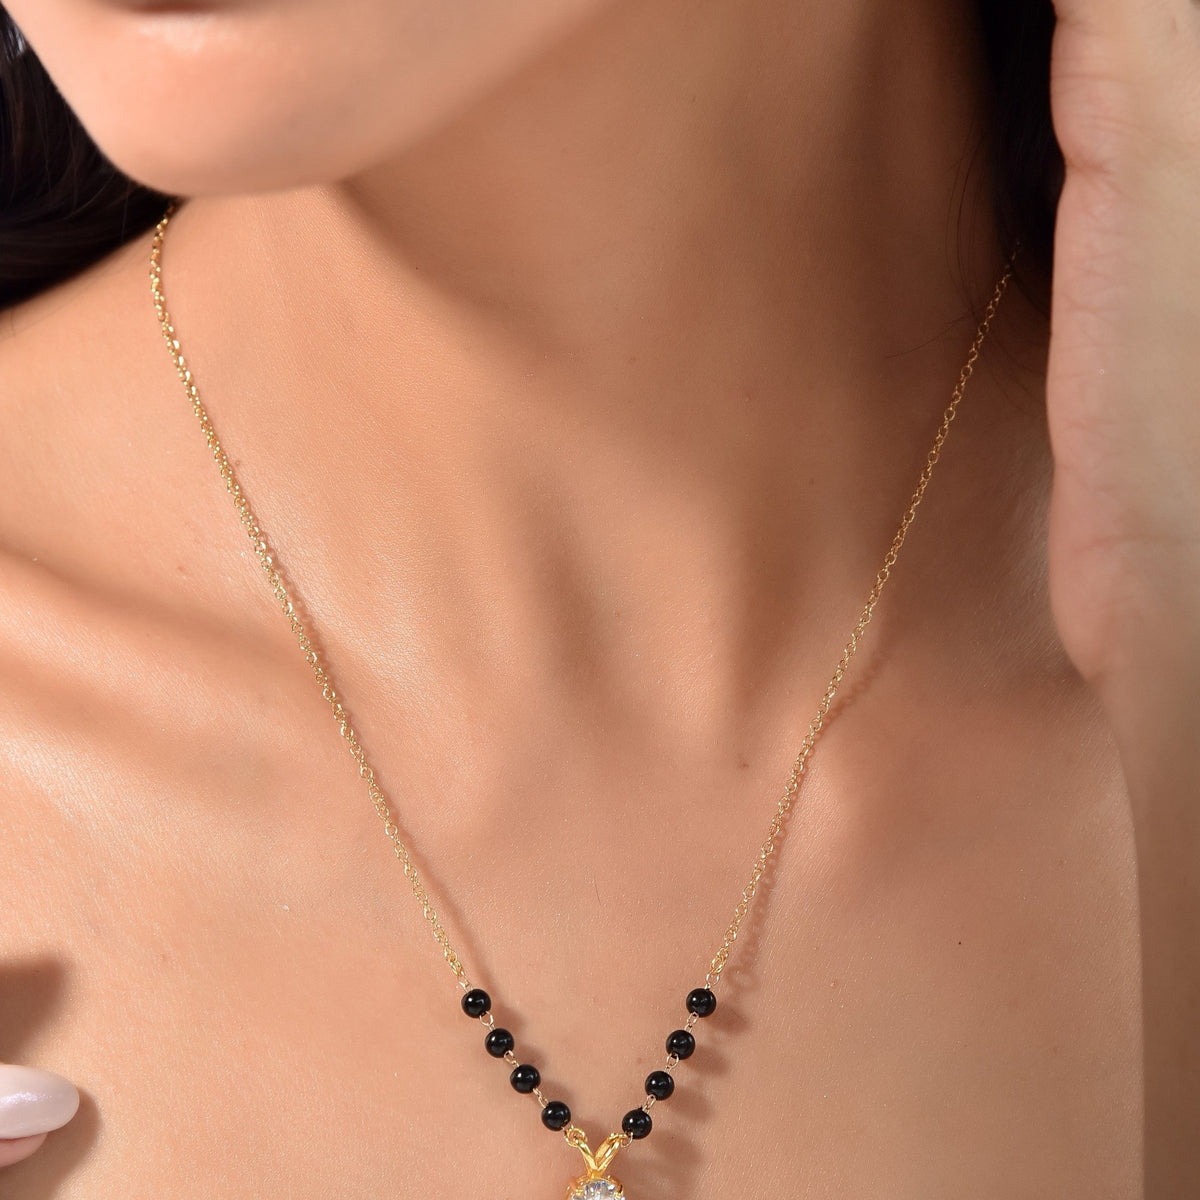 Why Mangalsutra Has Black Beads - The Caratlane